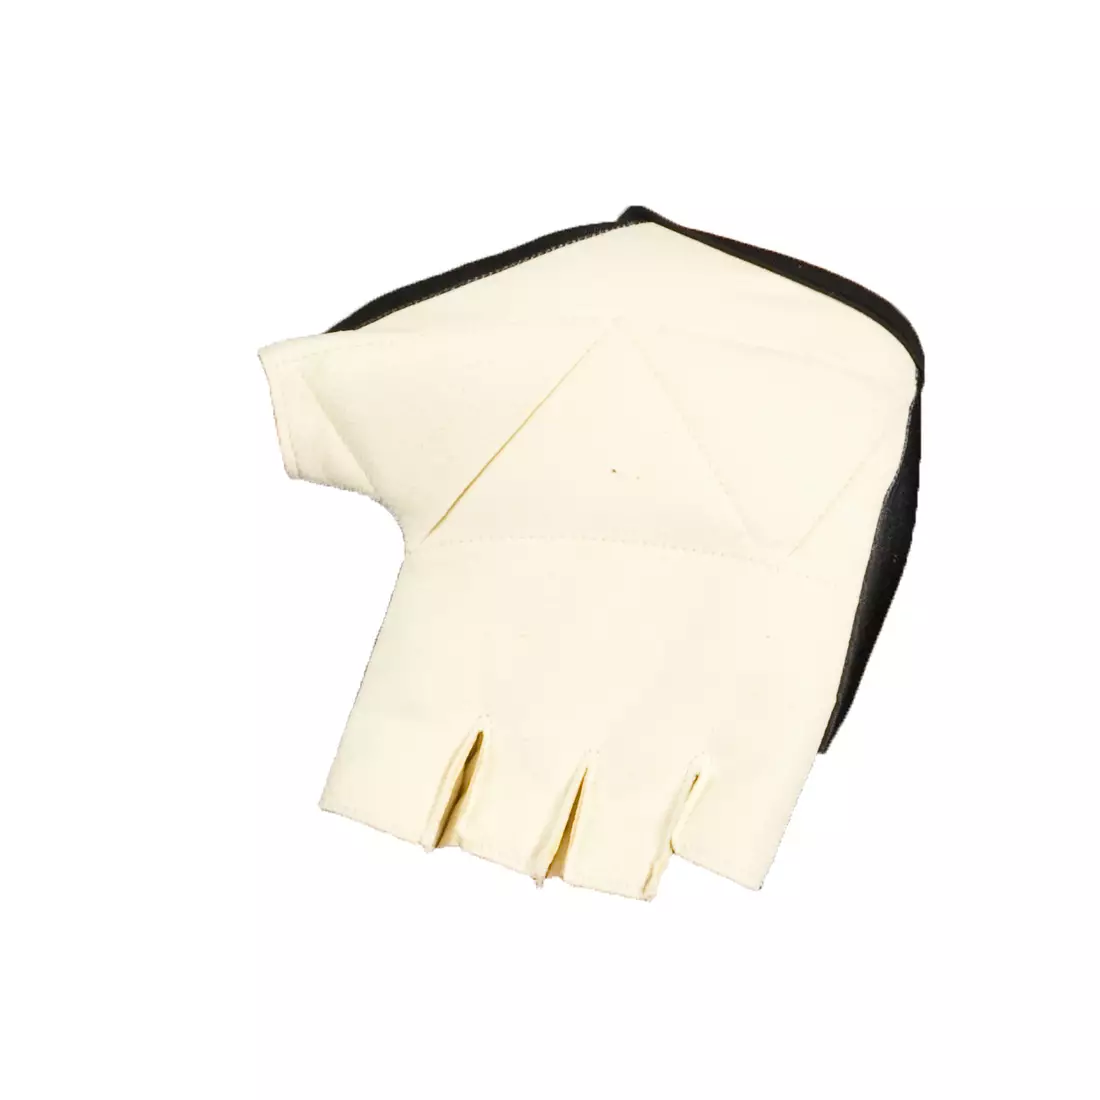 COLOMBIA 2015 cycling gloves